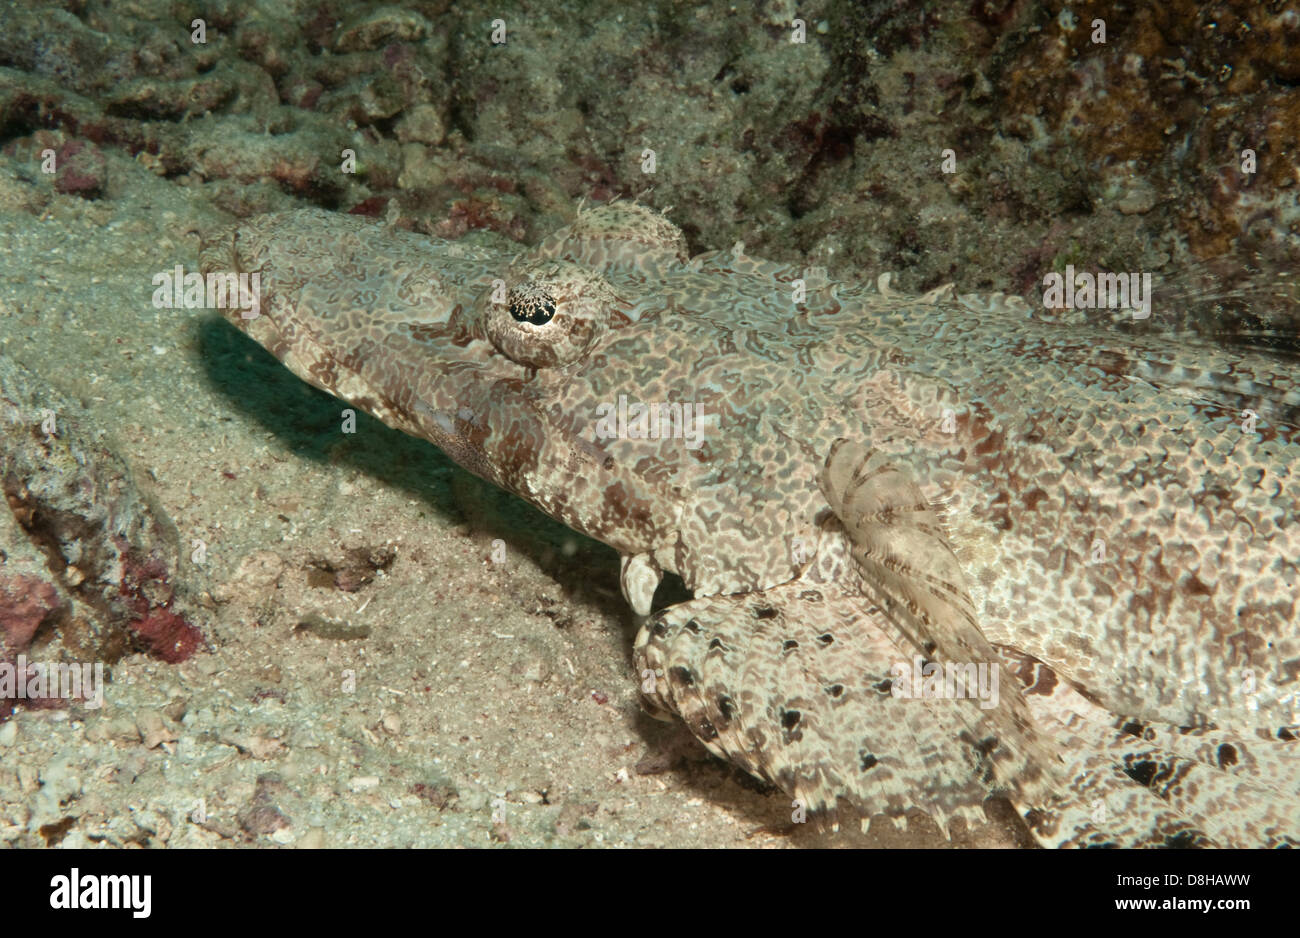 Crocodile fish on the lookout Stock Photo